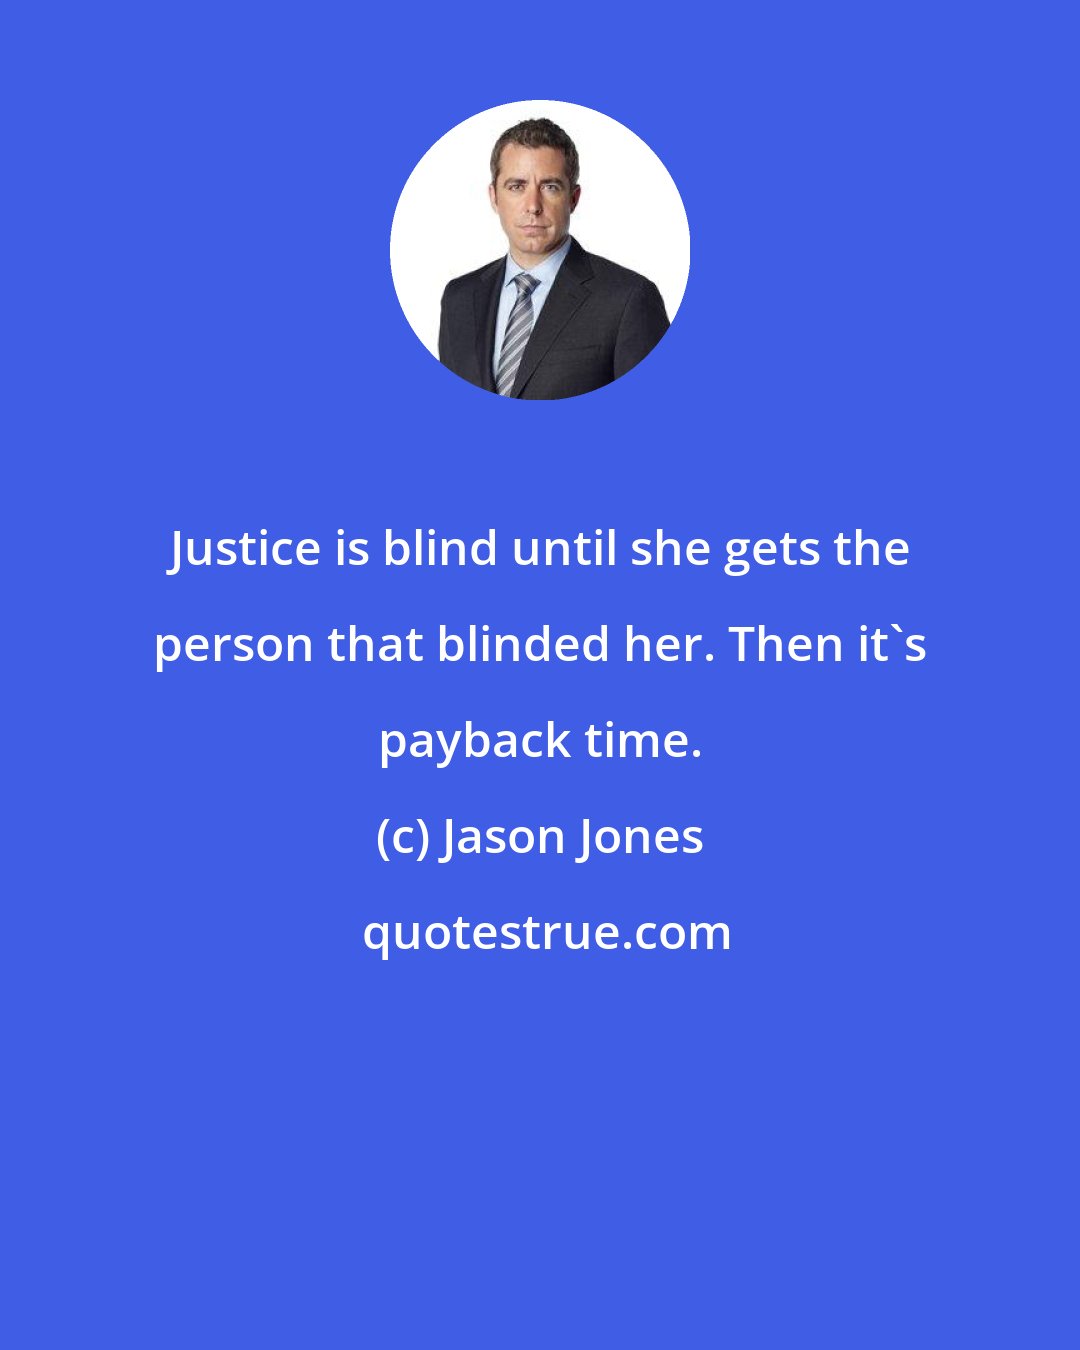 Jason Jones: Justice is blind until she gets the person that blinded her. Then it's payback time.